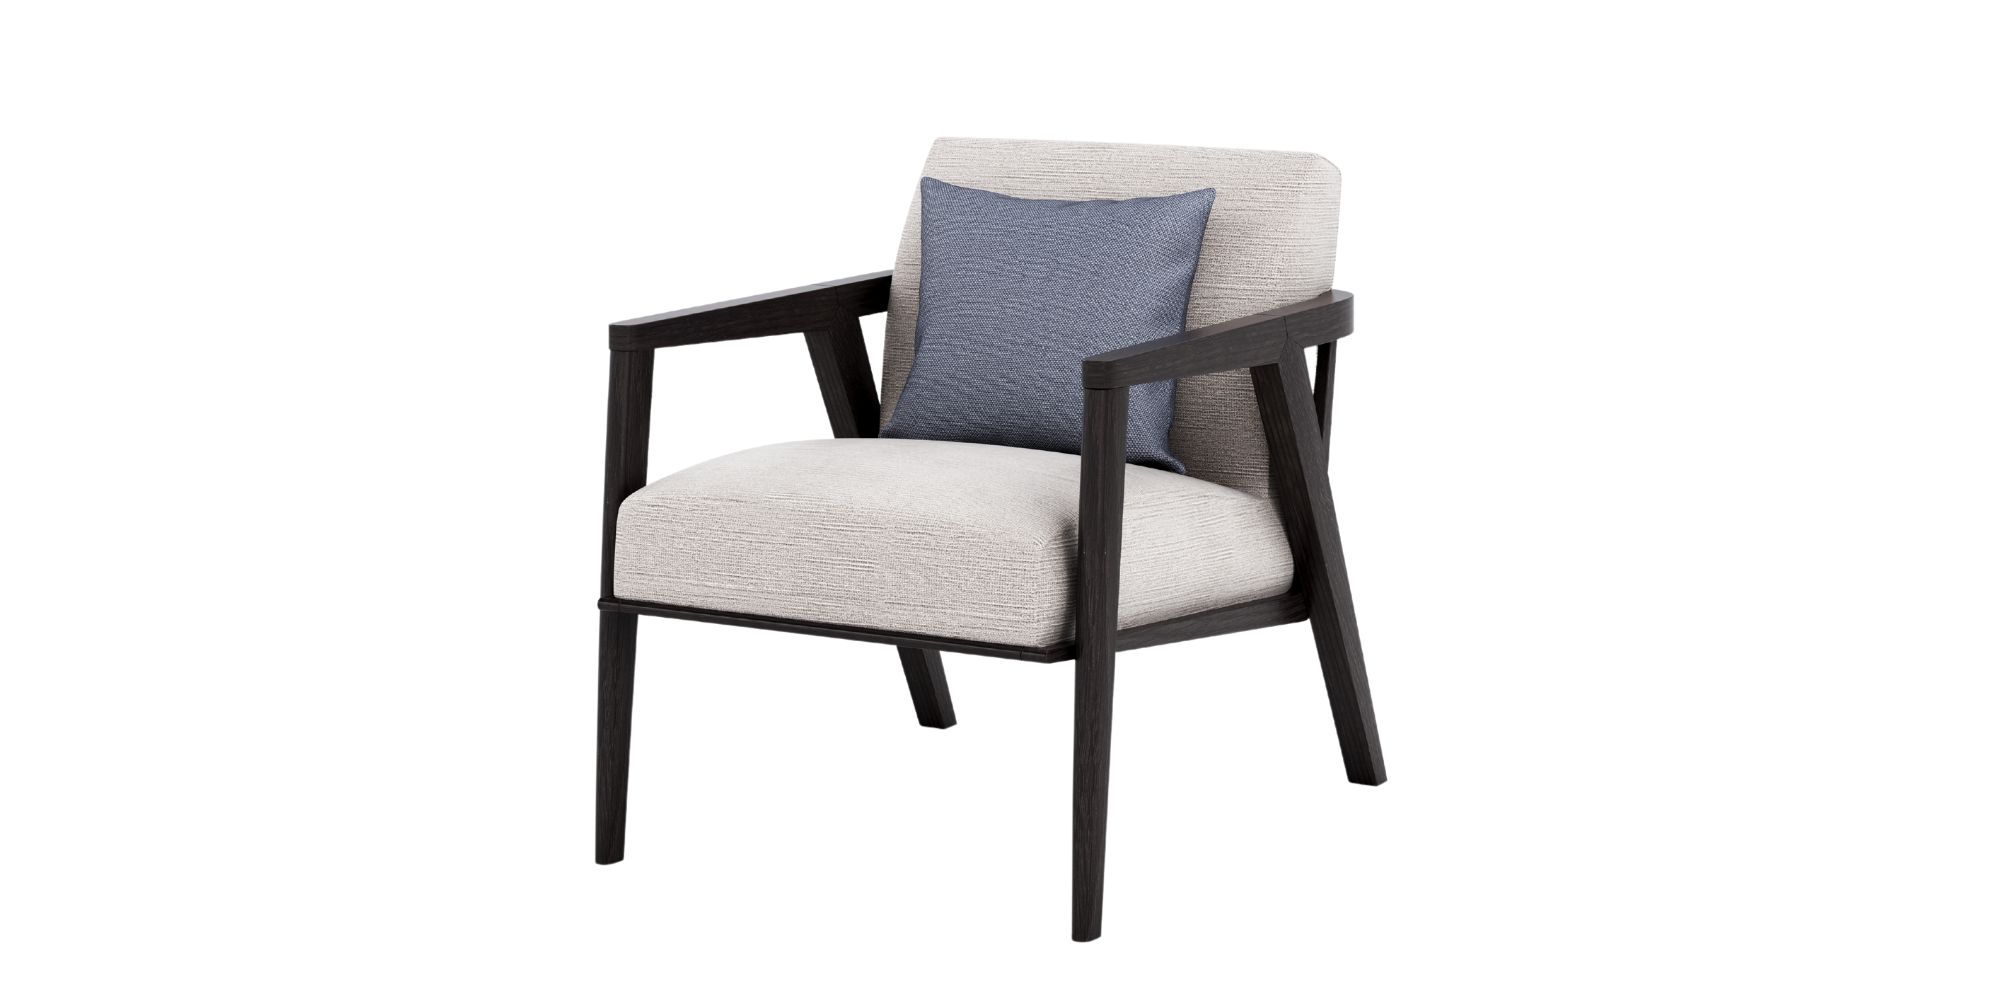 Chuchumber Short-Back Chair in Outdoor Chairs for Chuchumber collection